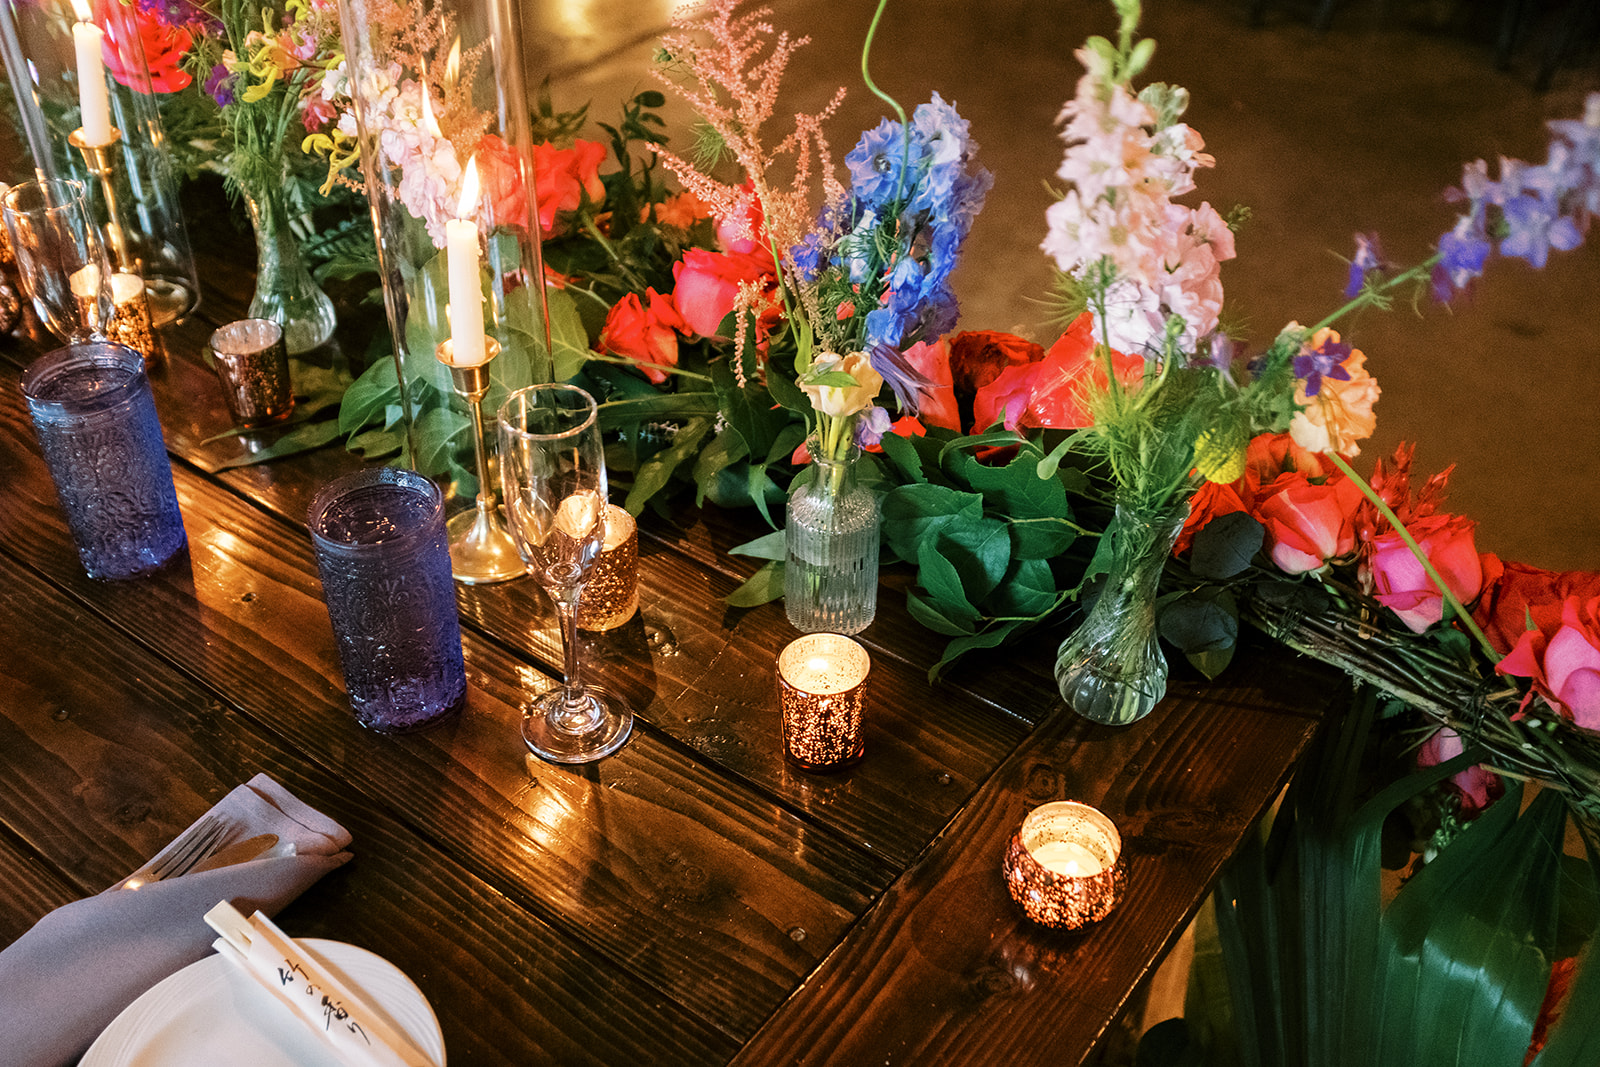 Elegant table setting with colorful floral arrangements and glowing candles for a festive event Smiths Tropical Paradise